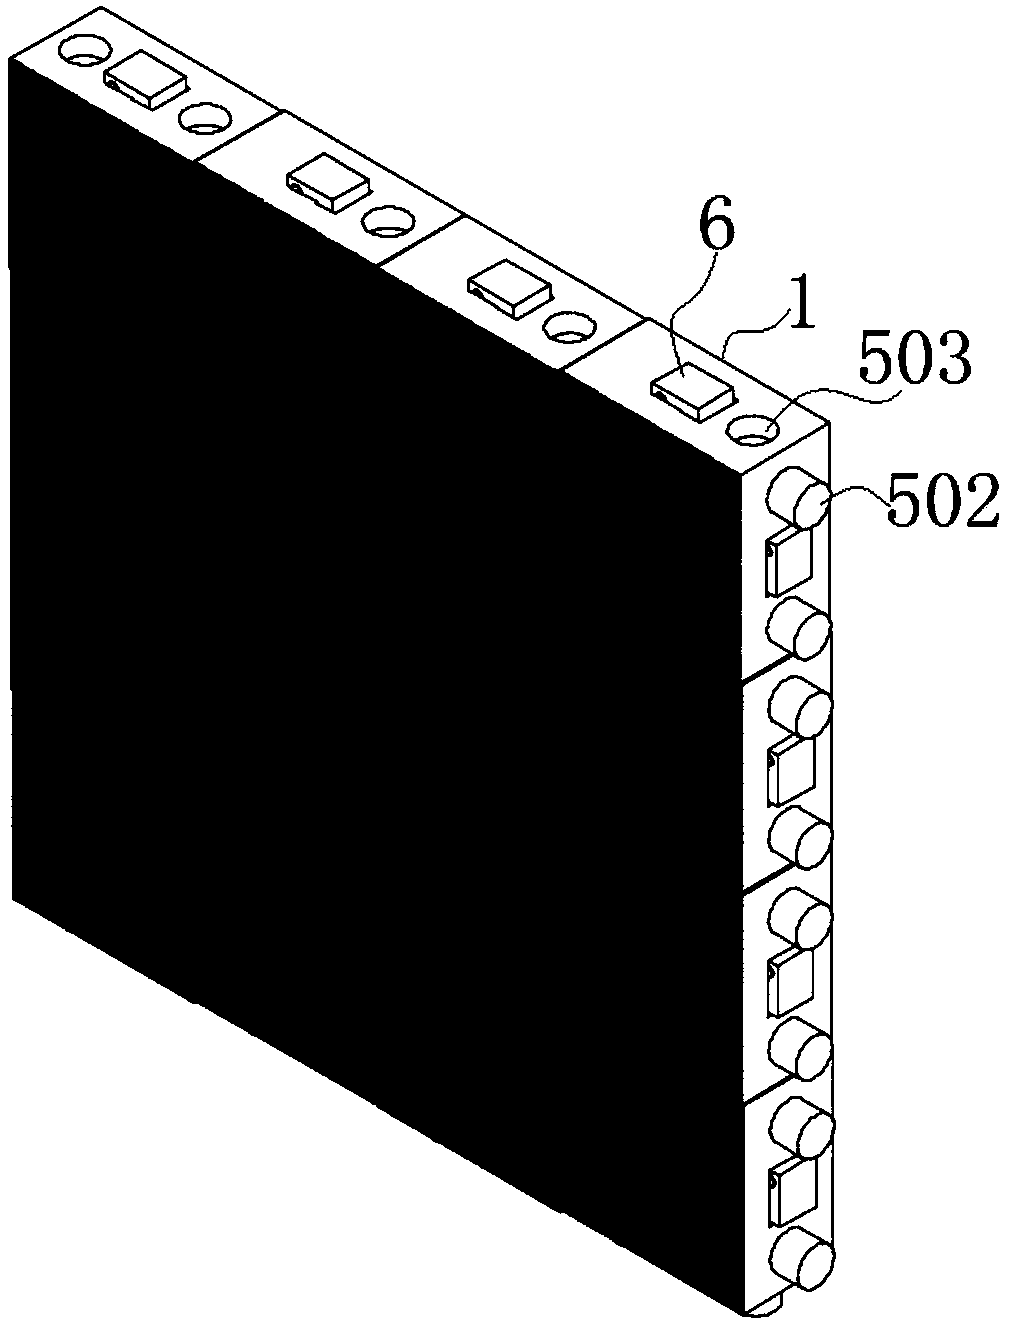 Building block for training children's line image recognition ability, system and method